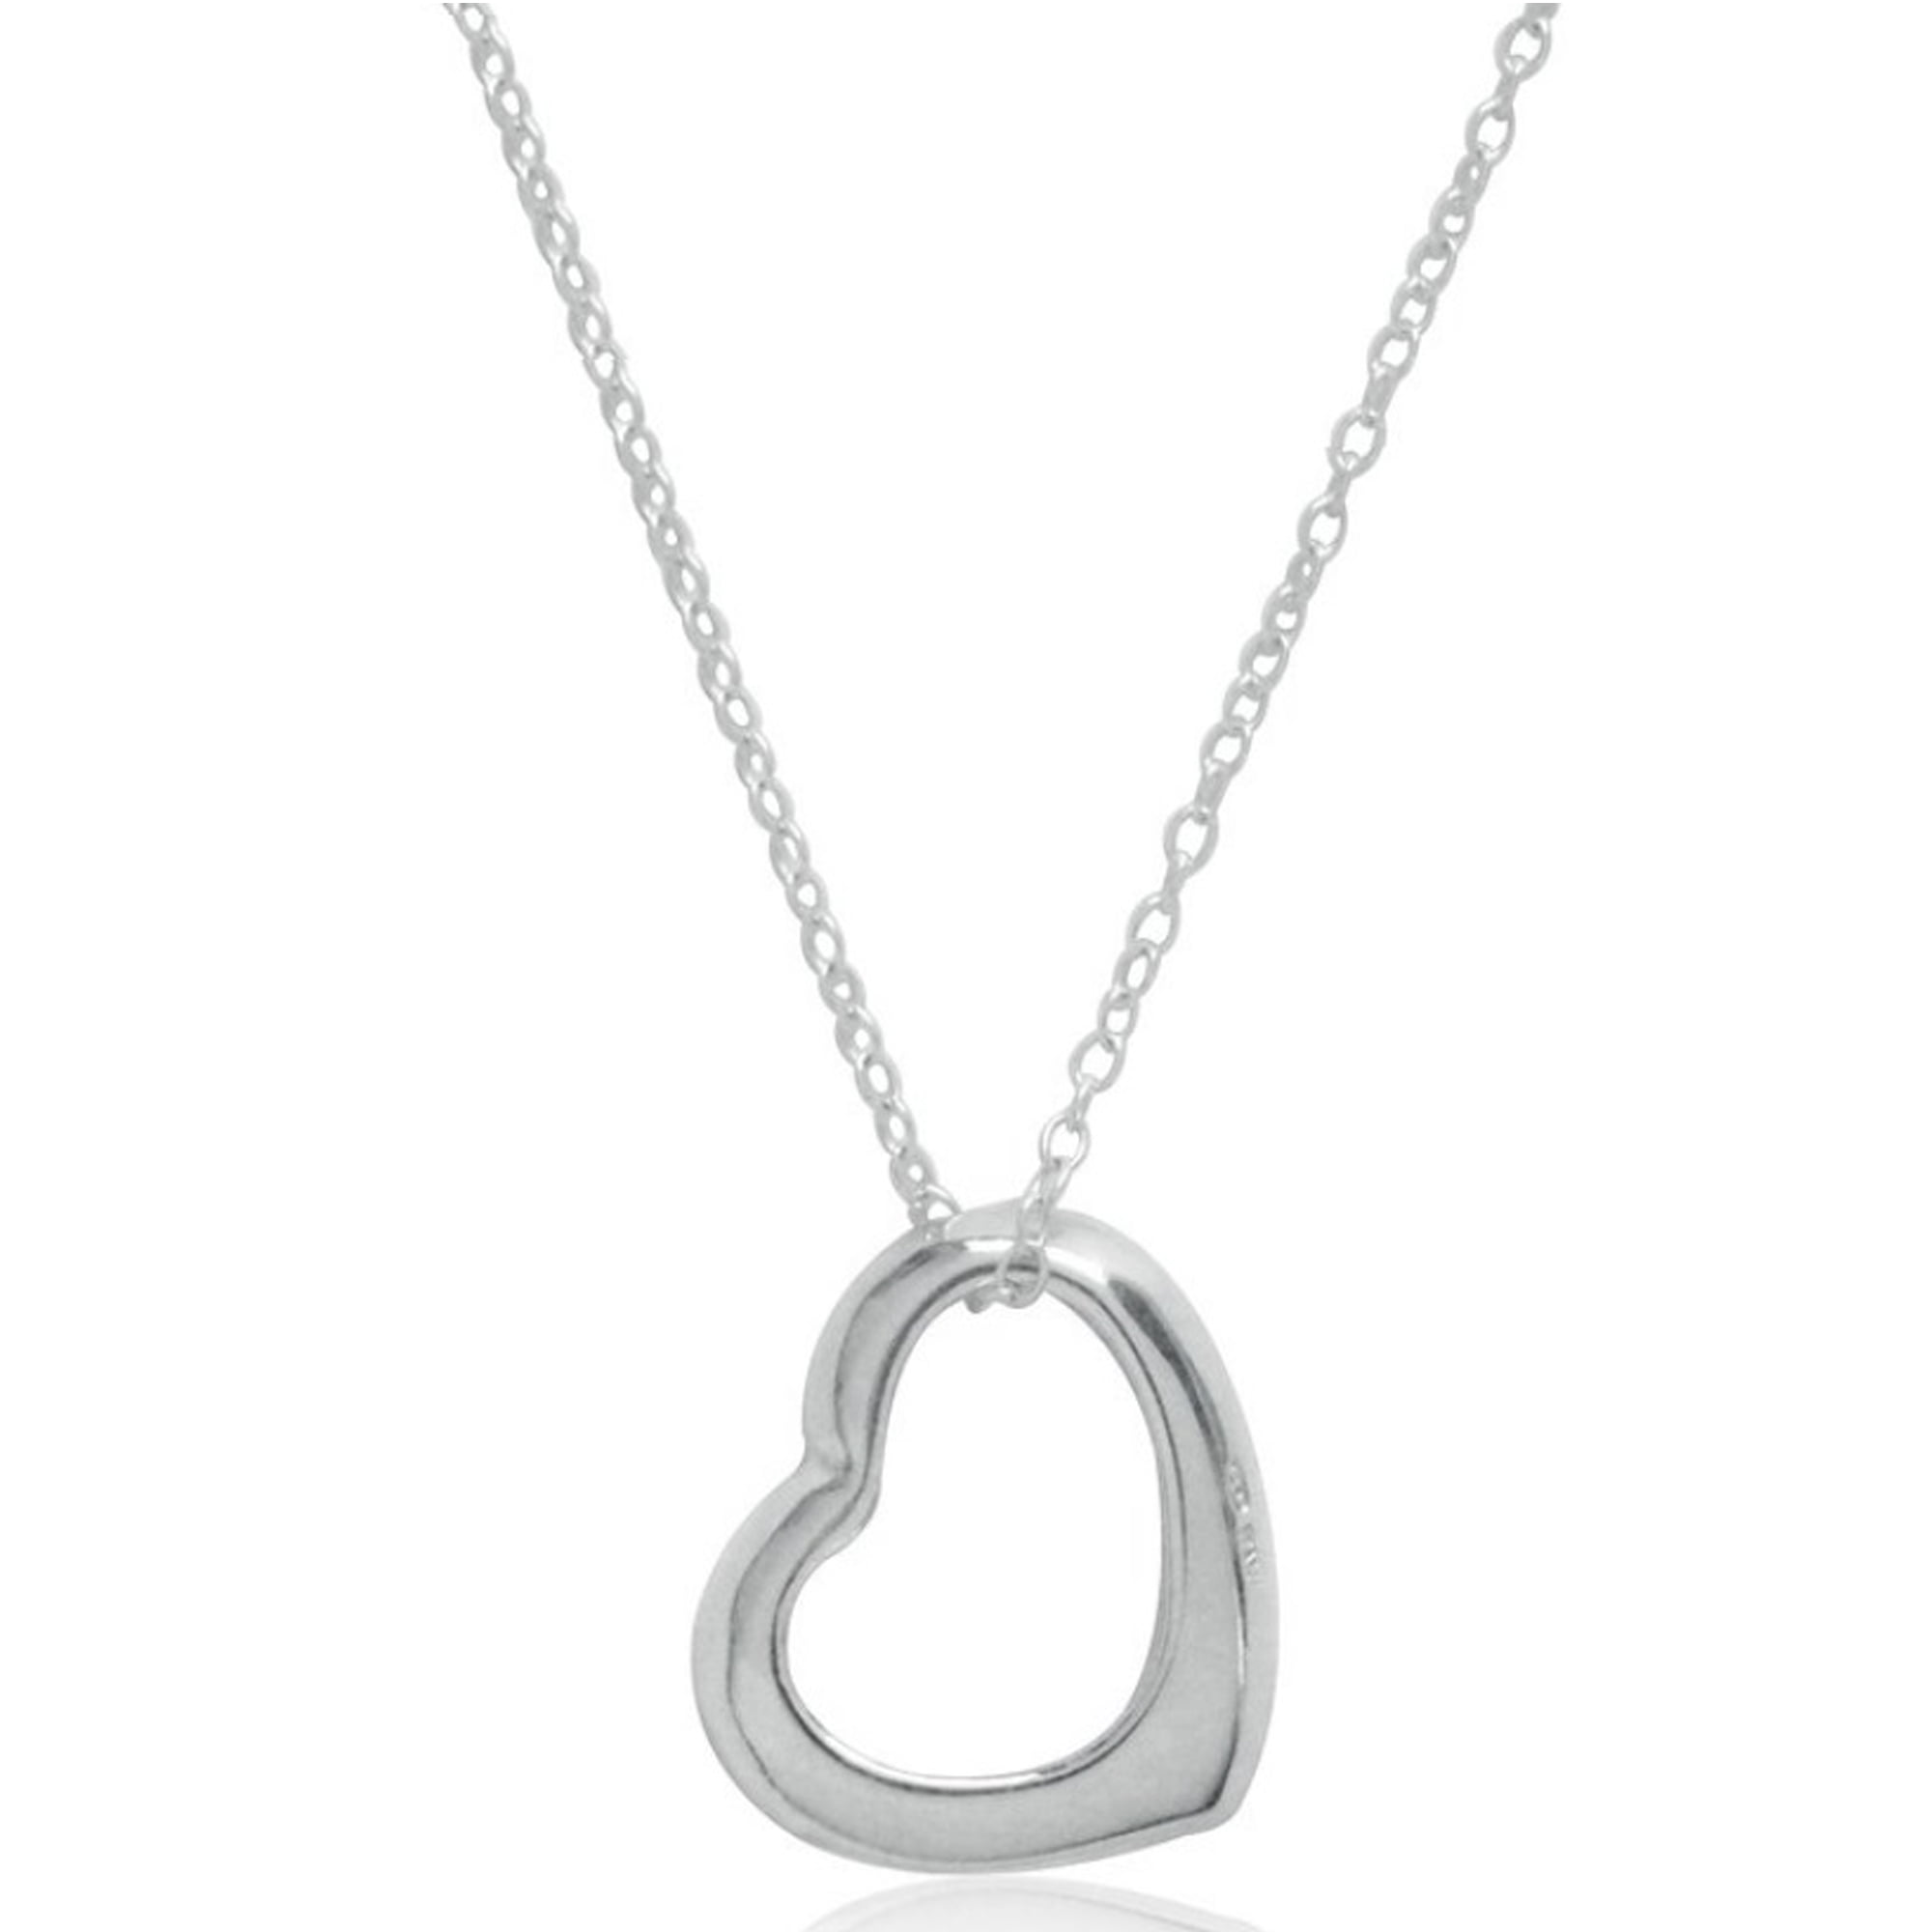 Ritastephens Sterling Silver & Diamond Heart Charm Pendant Necklace 18 Inches 0.06ct